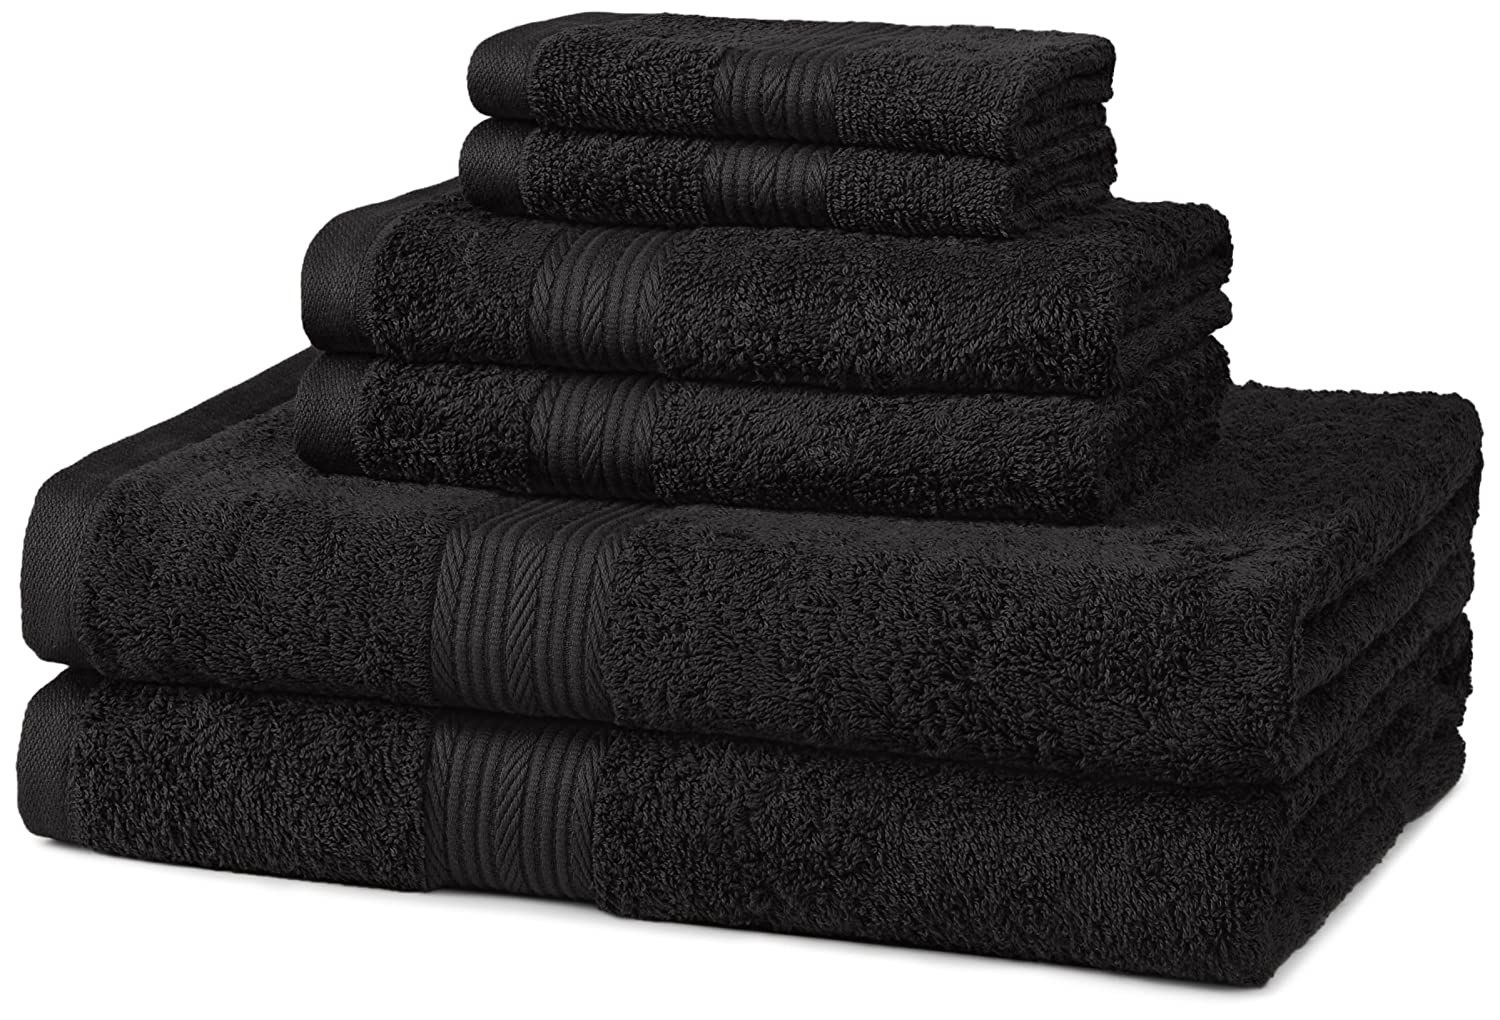 Six black towels of different sizes folded on top of each other